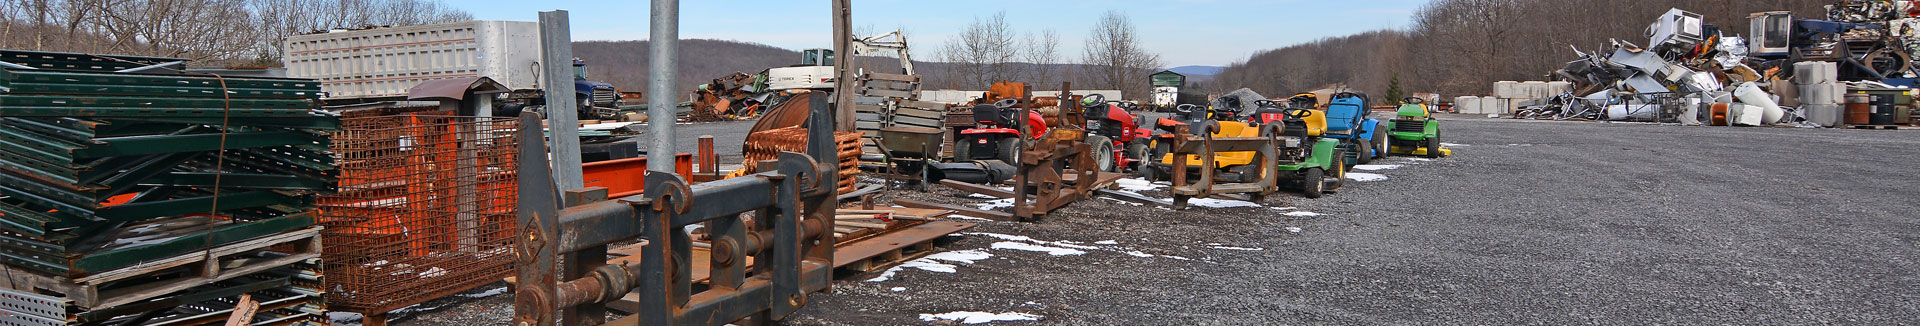 Cash for scrap metal recycling services in Swanton, MD